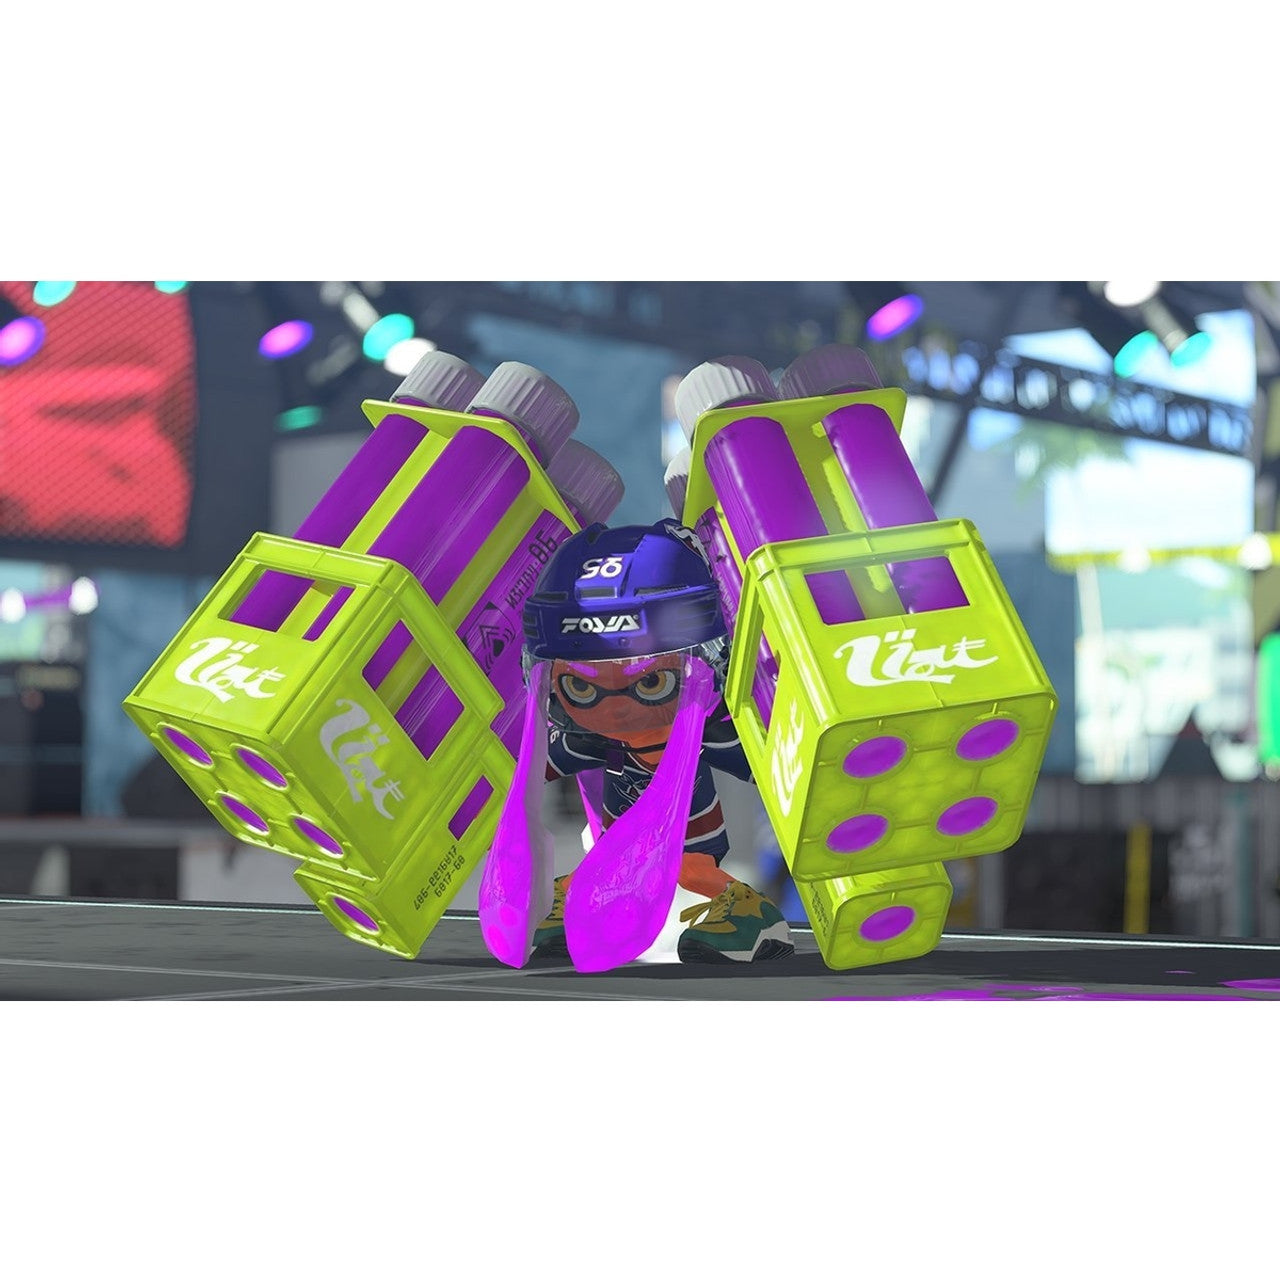 Product Image : This is brand new.<br>The squid kids called Inklings are back to splat more ink and claim more turf in this colorful and chaotic 4-on-4 action shooter. For the first time, take Turf War battles on-the-go with the Nintendo Switch system, and use any of the consoles portable play styles for intense local multiplayer1 action. Even team up for new 4-player co-op fun in Salmon Run!

Two years have passed since the original Splatoon game was released, and two years have also passed in Inkopolis! 